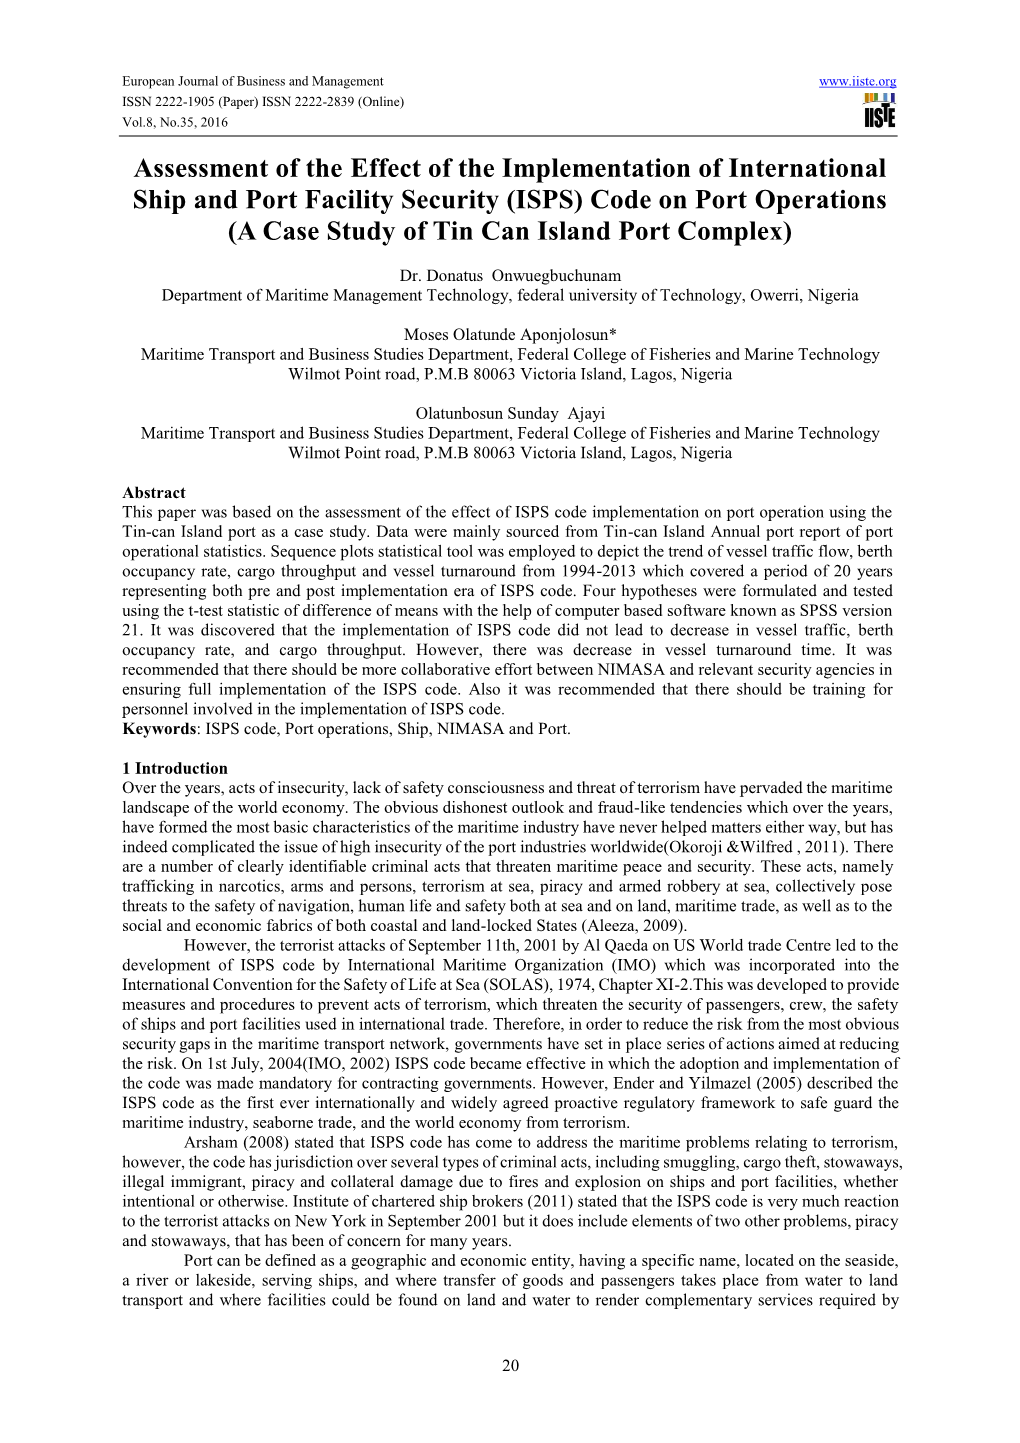 ISPS) Code on Port Operations (A Case Study of Tin Can Island Port Complex